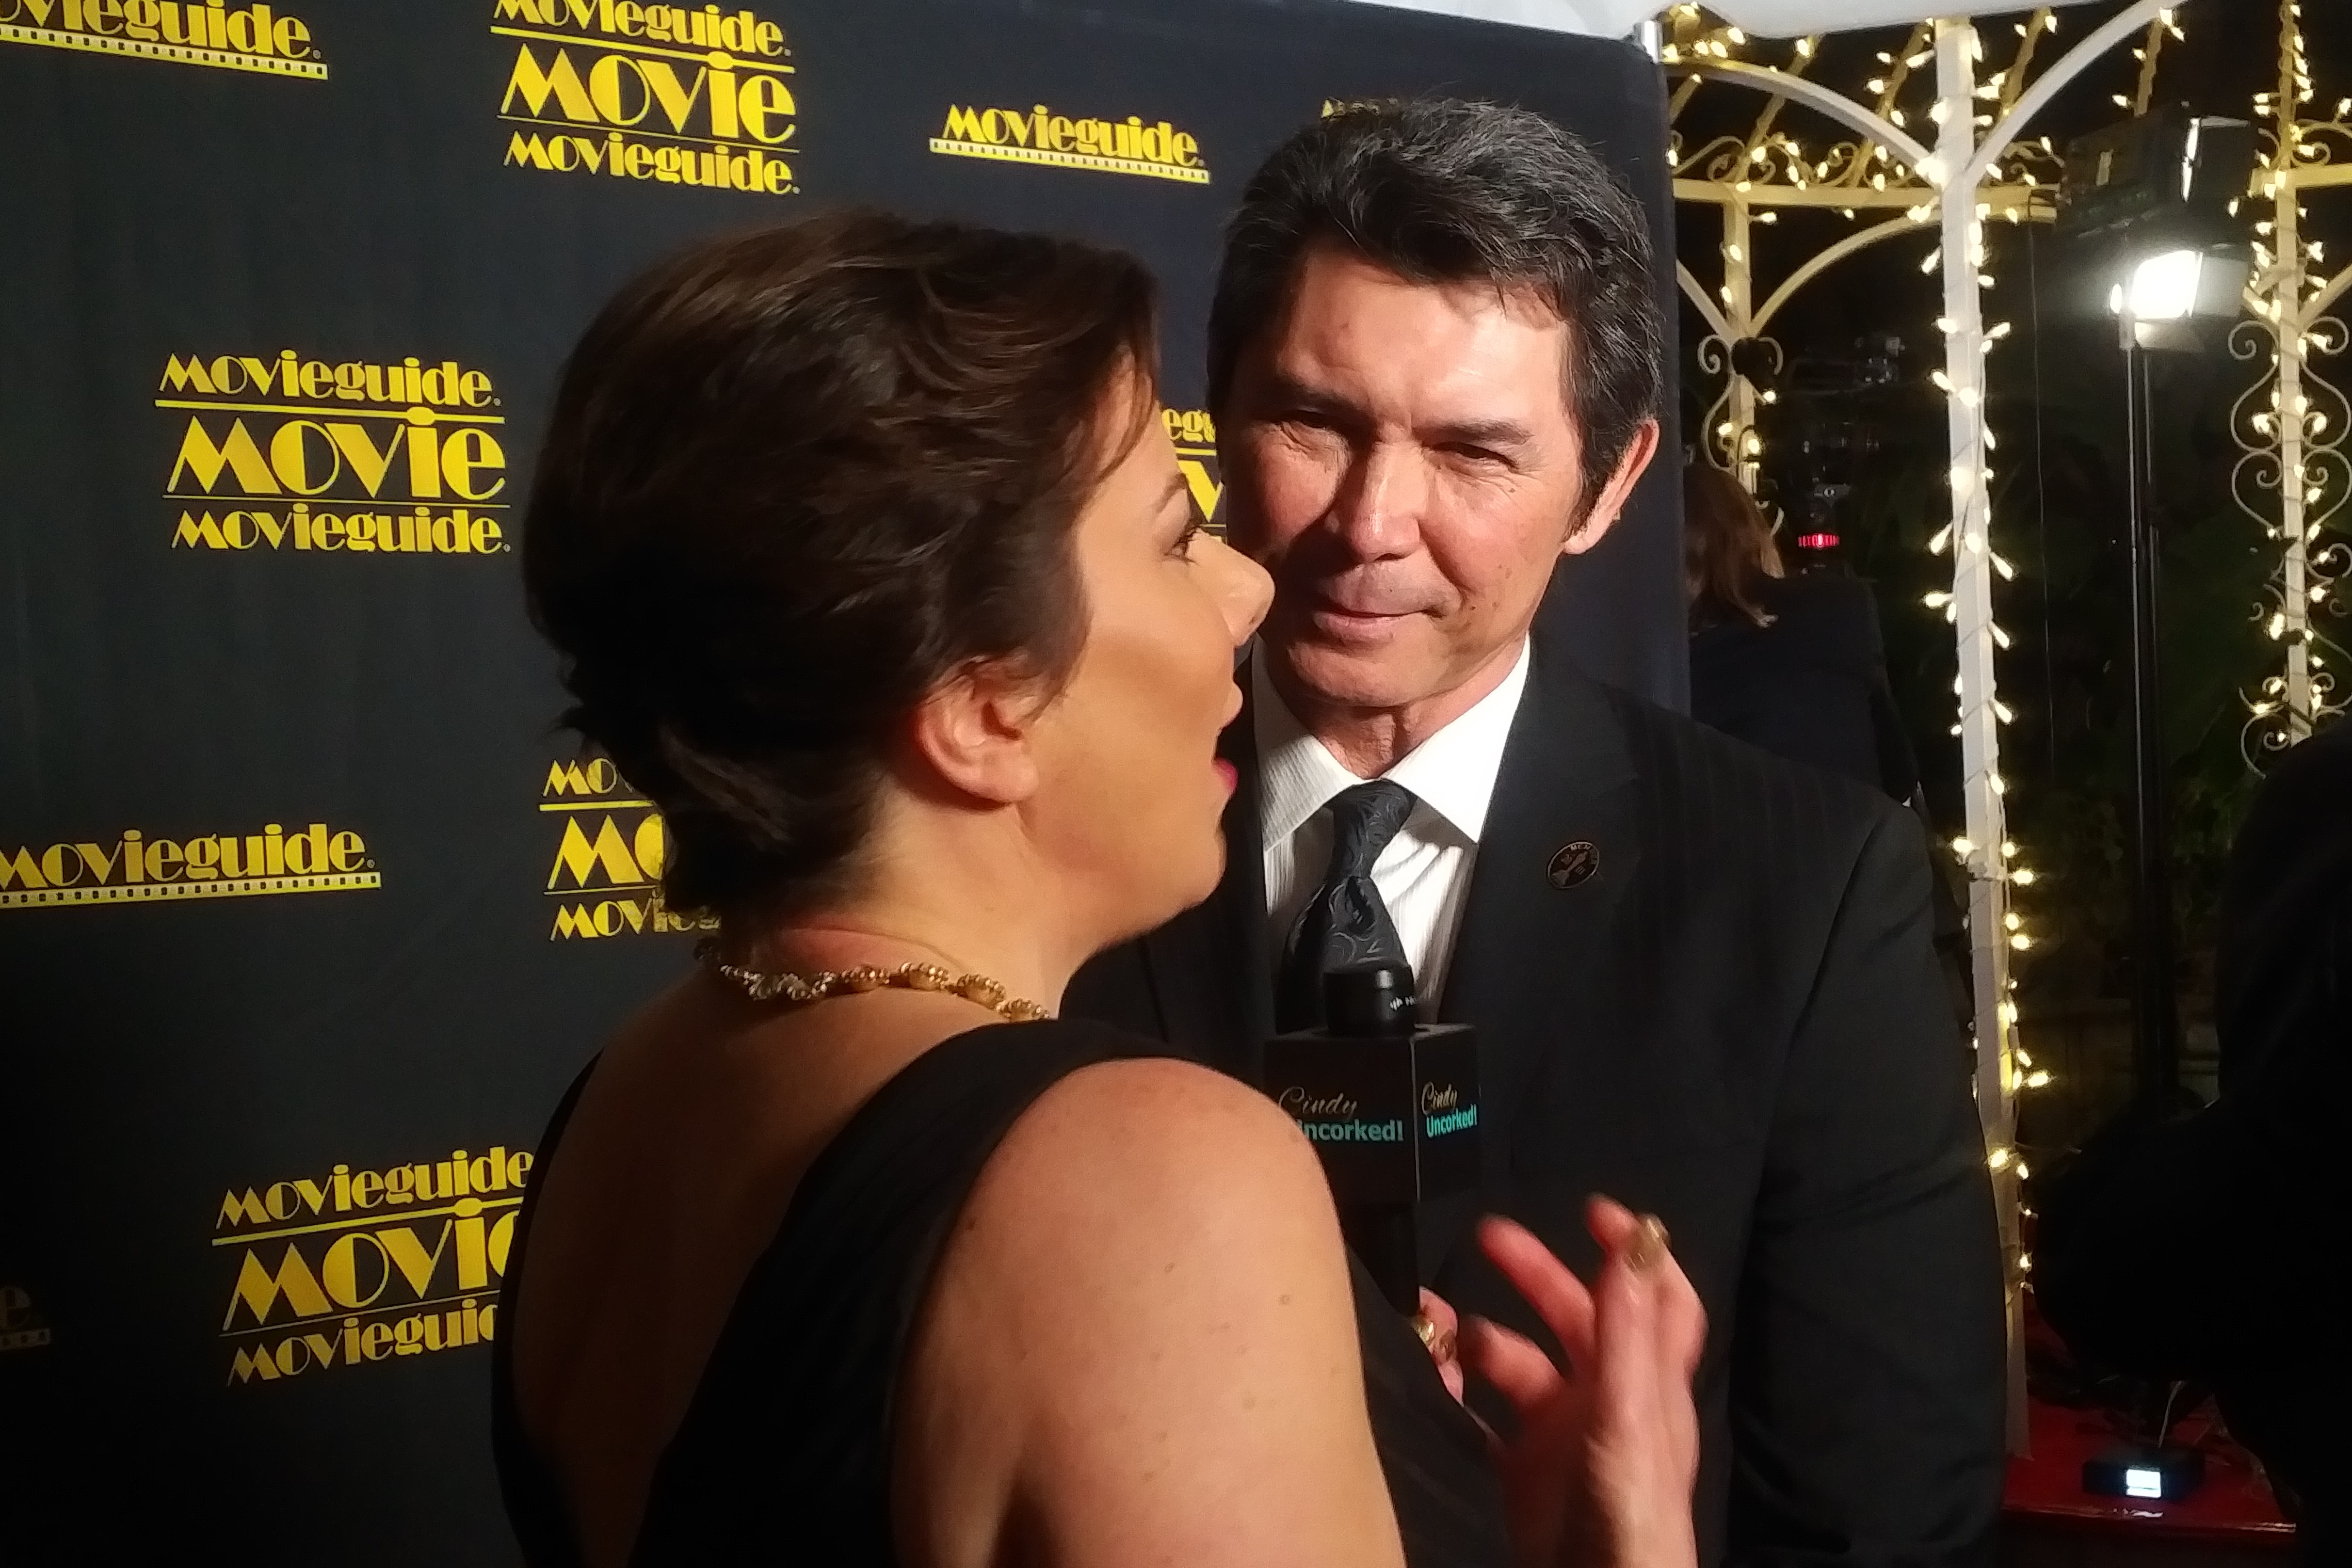 Cindy Ashton interviewing Lou Diamond Phillips at the MovieGuide Awards.